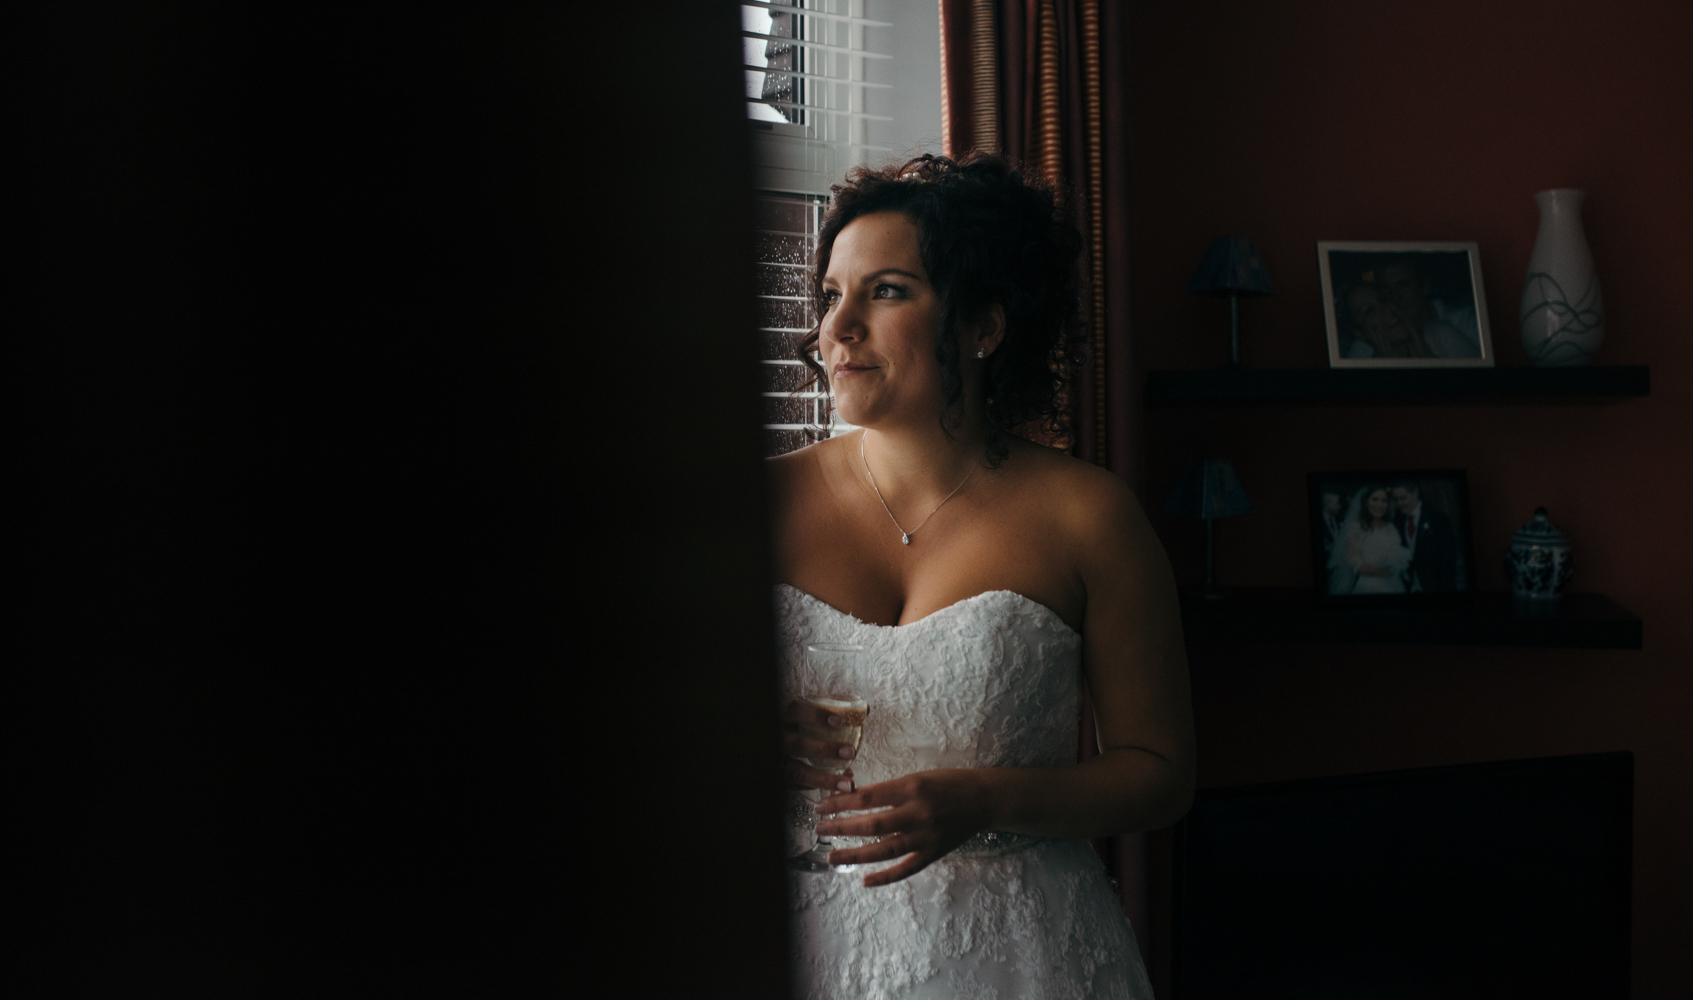 The bride looking out of the living room window waiting for the cars to arrive